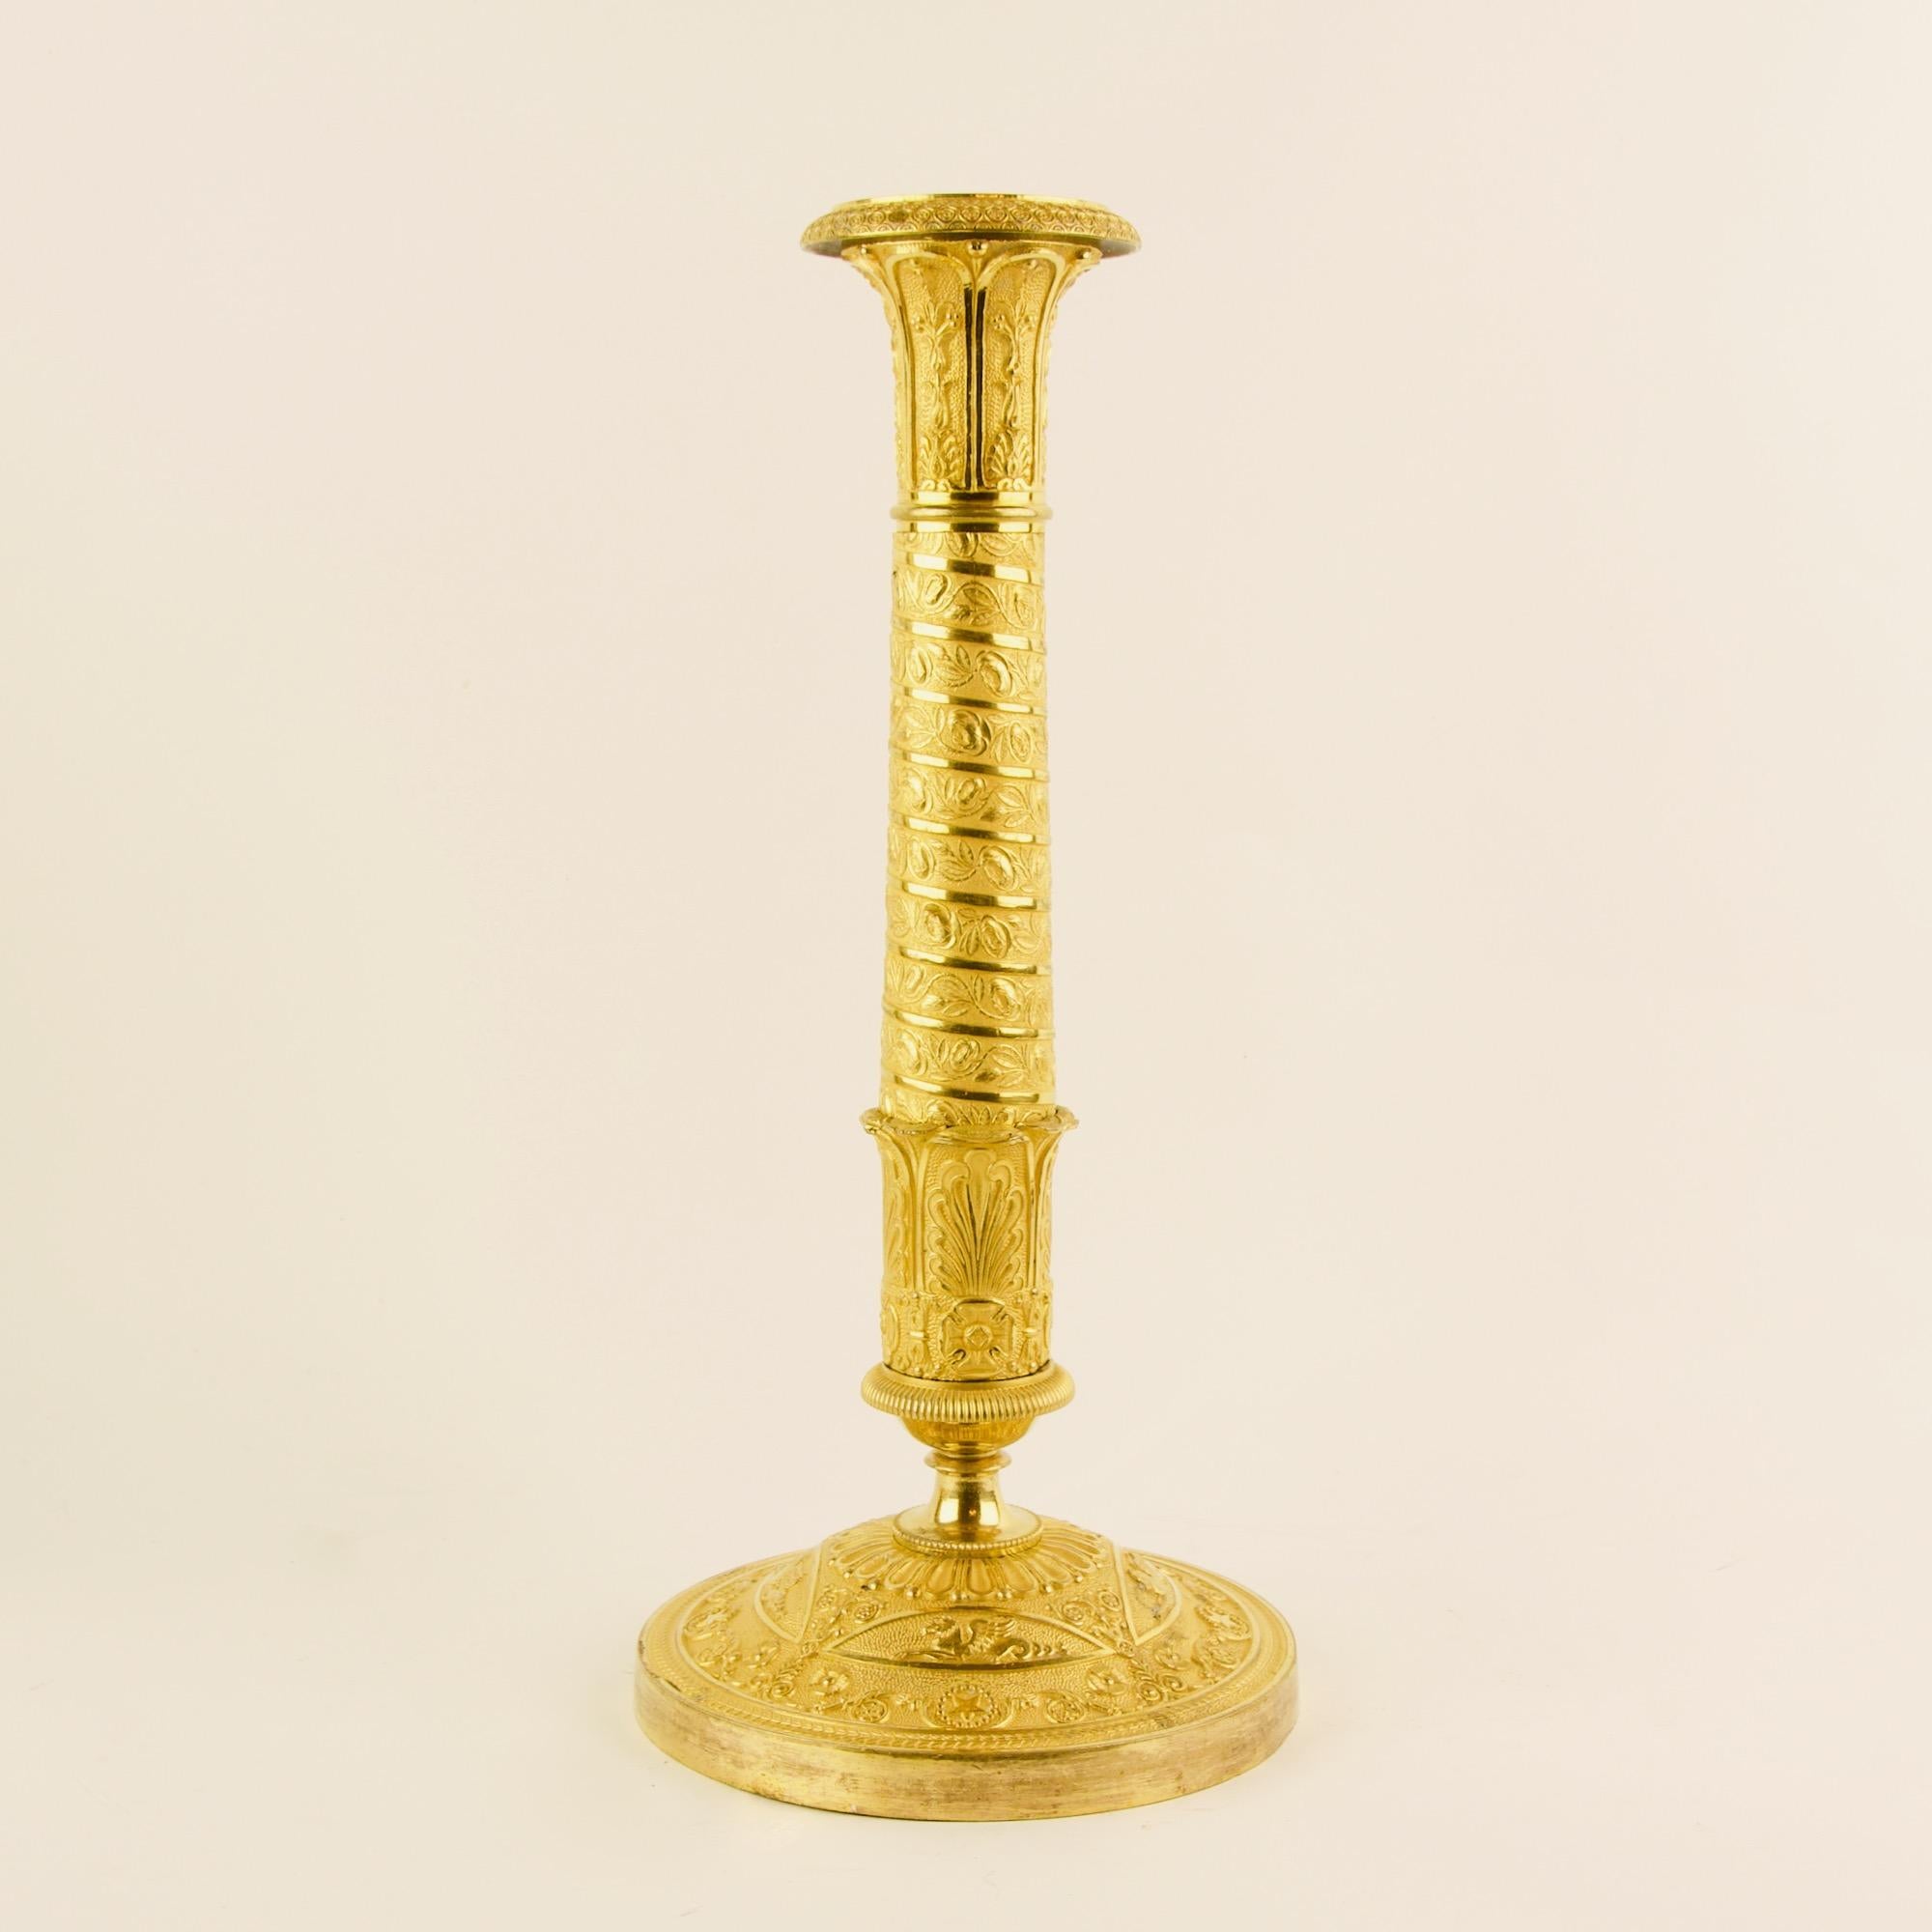 Pair of early 19th Century Empire Trajan's column ormolu candlesticks in the manner of P.-P. Thomire (1751-1843):

Pair of large Empire ormolu candlesticks, the stem ressembling the Trajan's column or the column of the place Vendôme in Paris